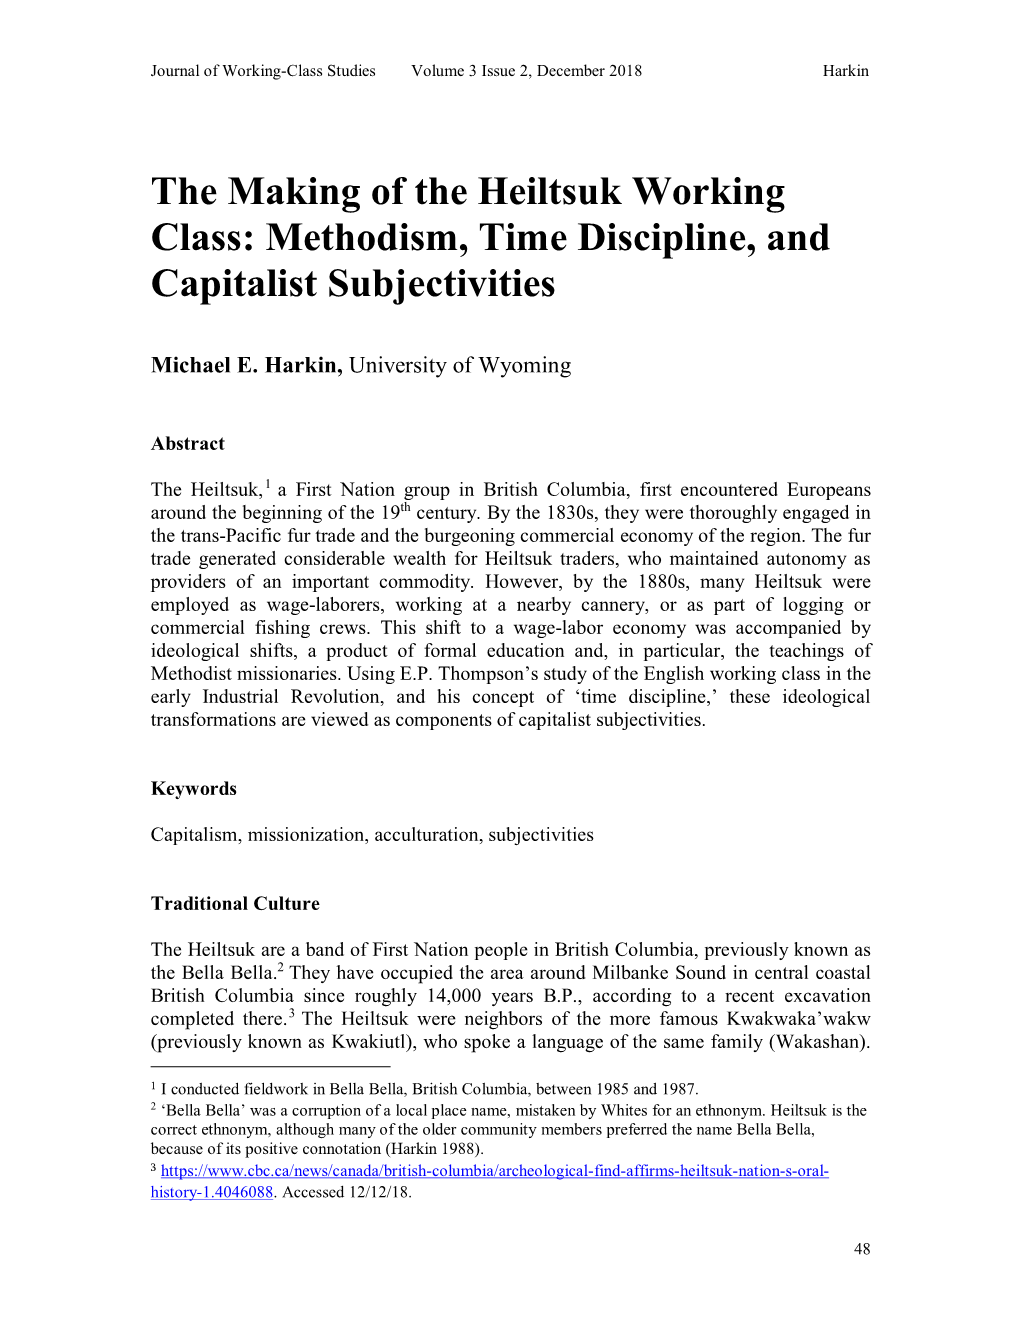 The Making of the Heiltsuk Working Class: Methodism, Time Discipline, and Capitalist Subjectivities